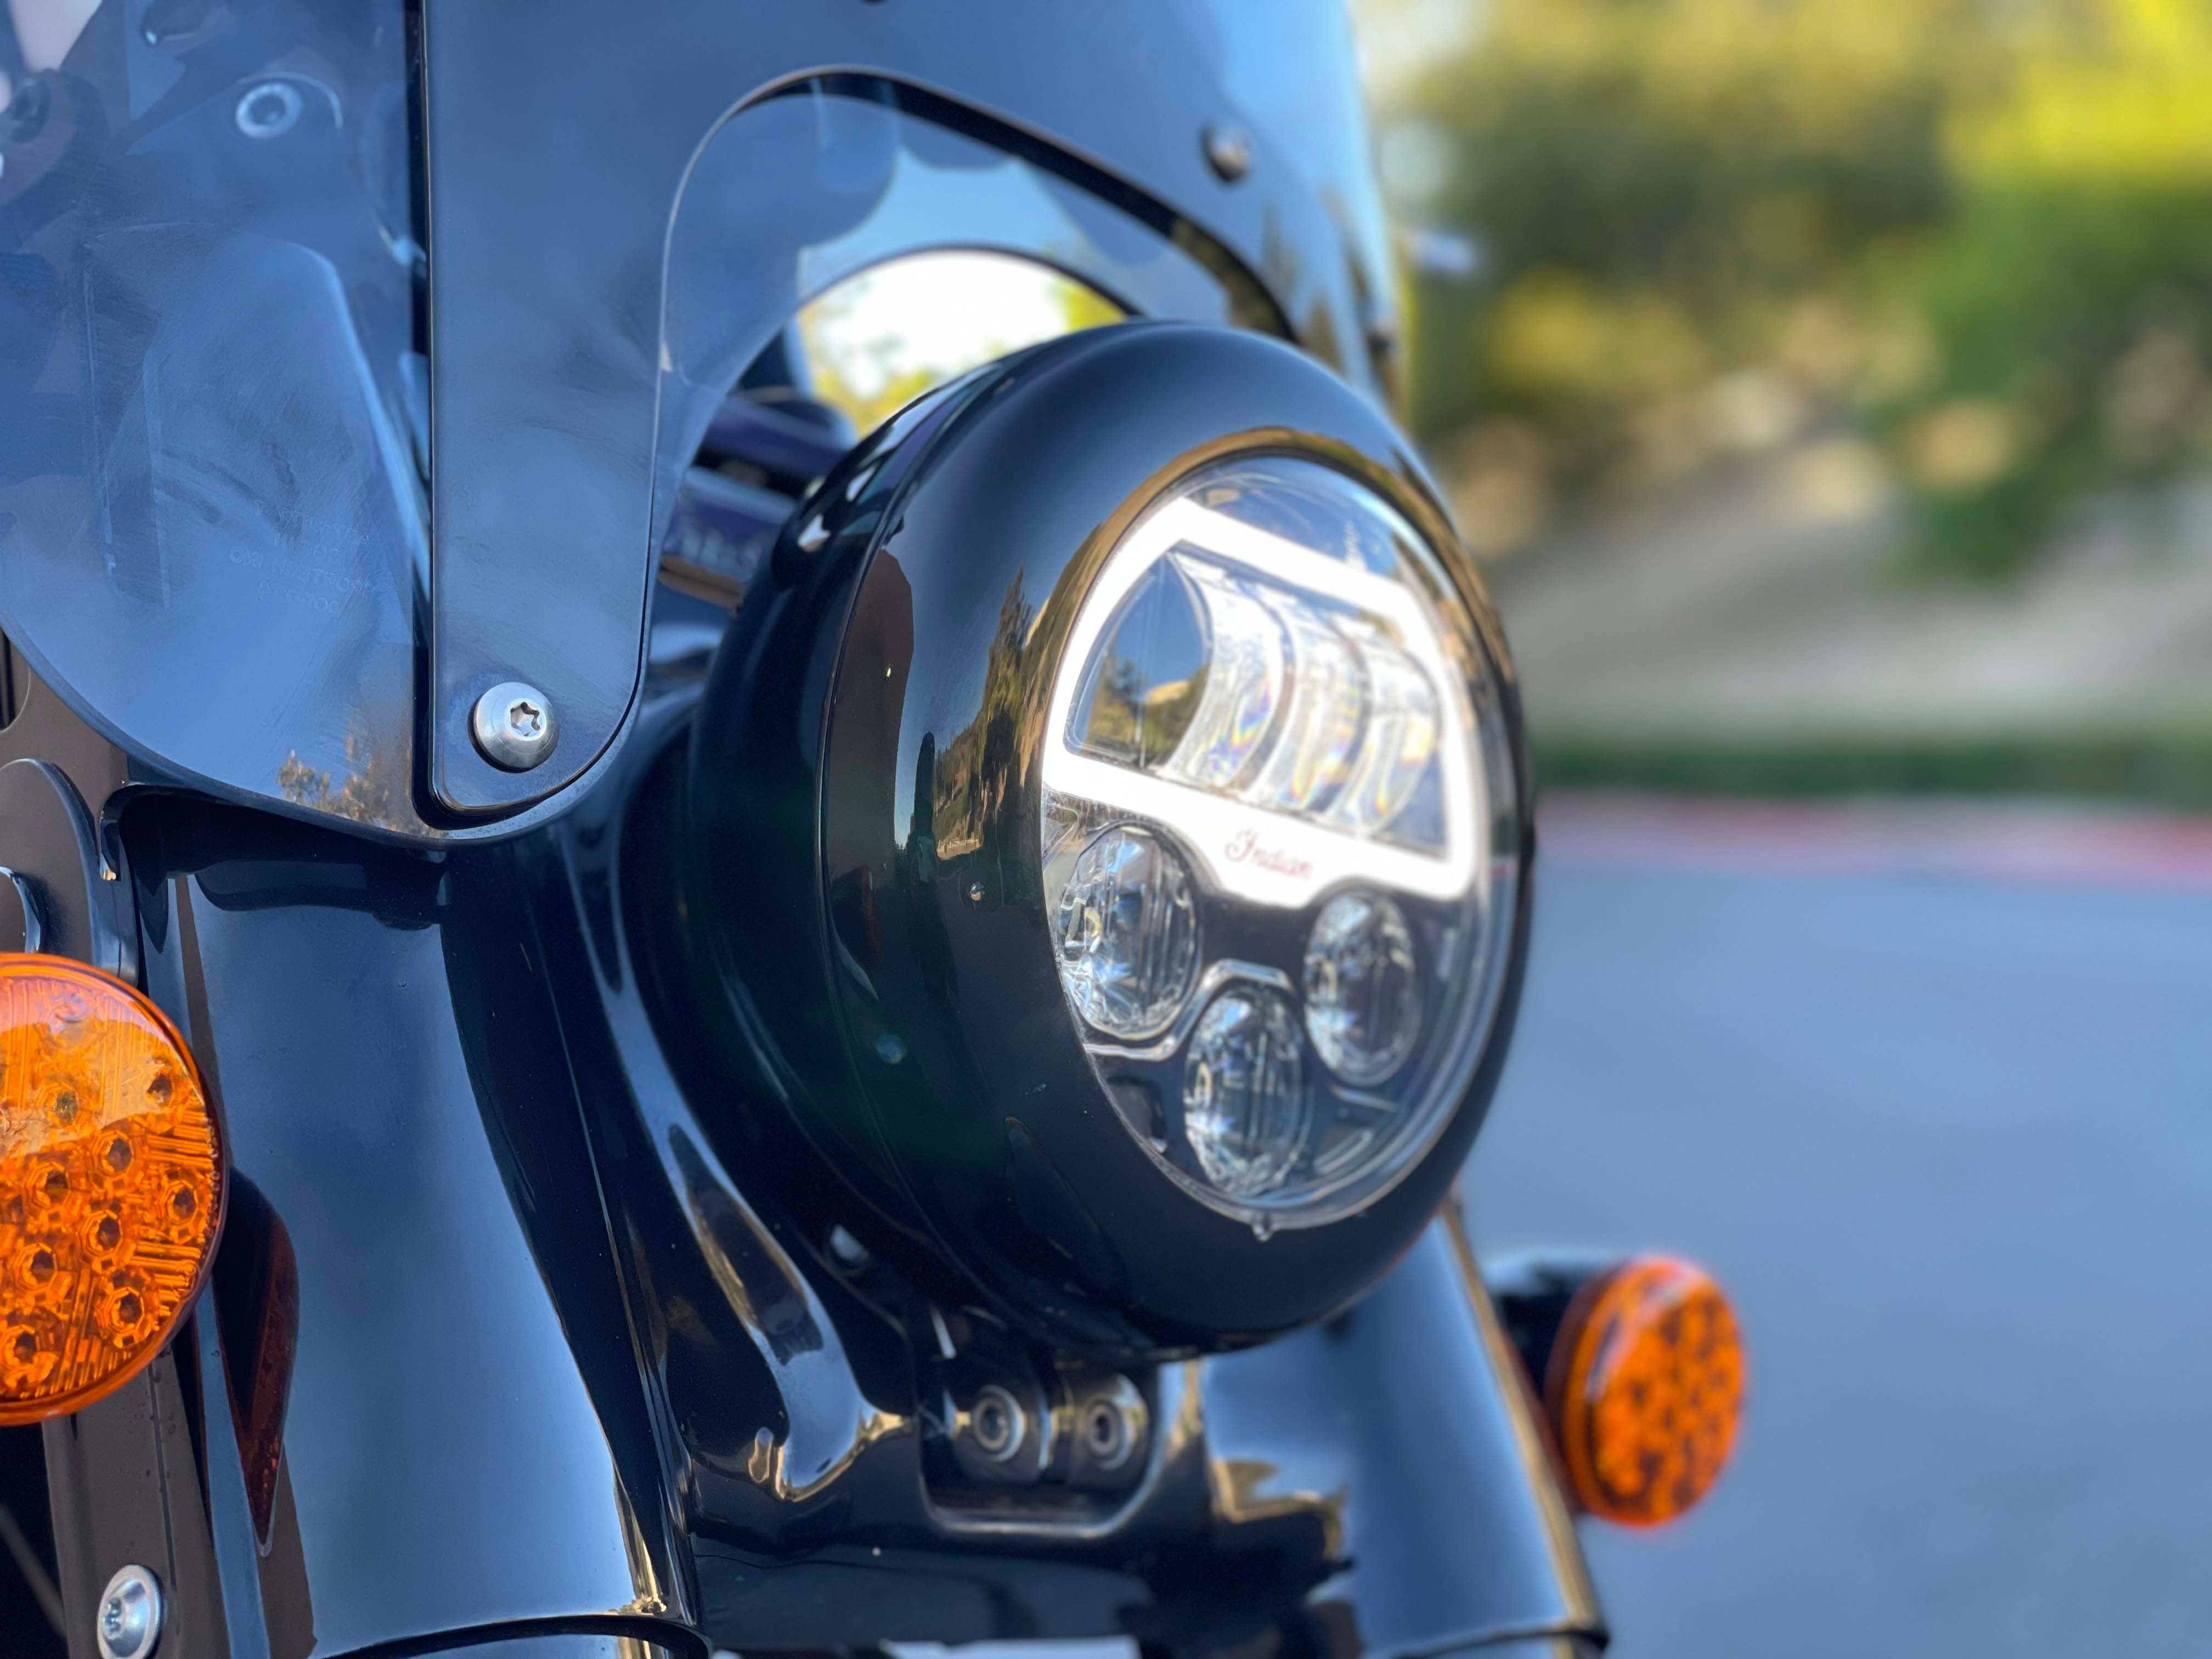 2022 Indian Chief Bobber First Ride Headlight